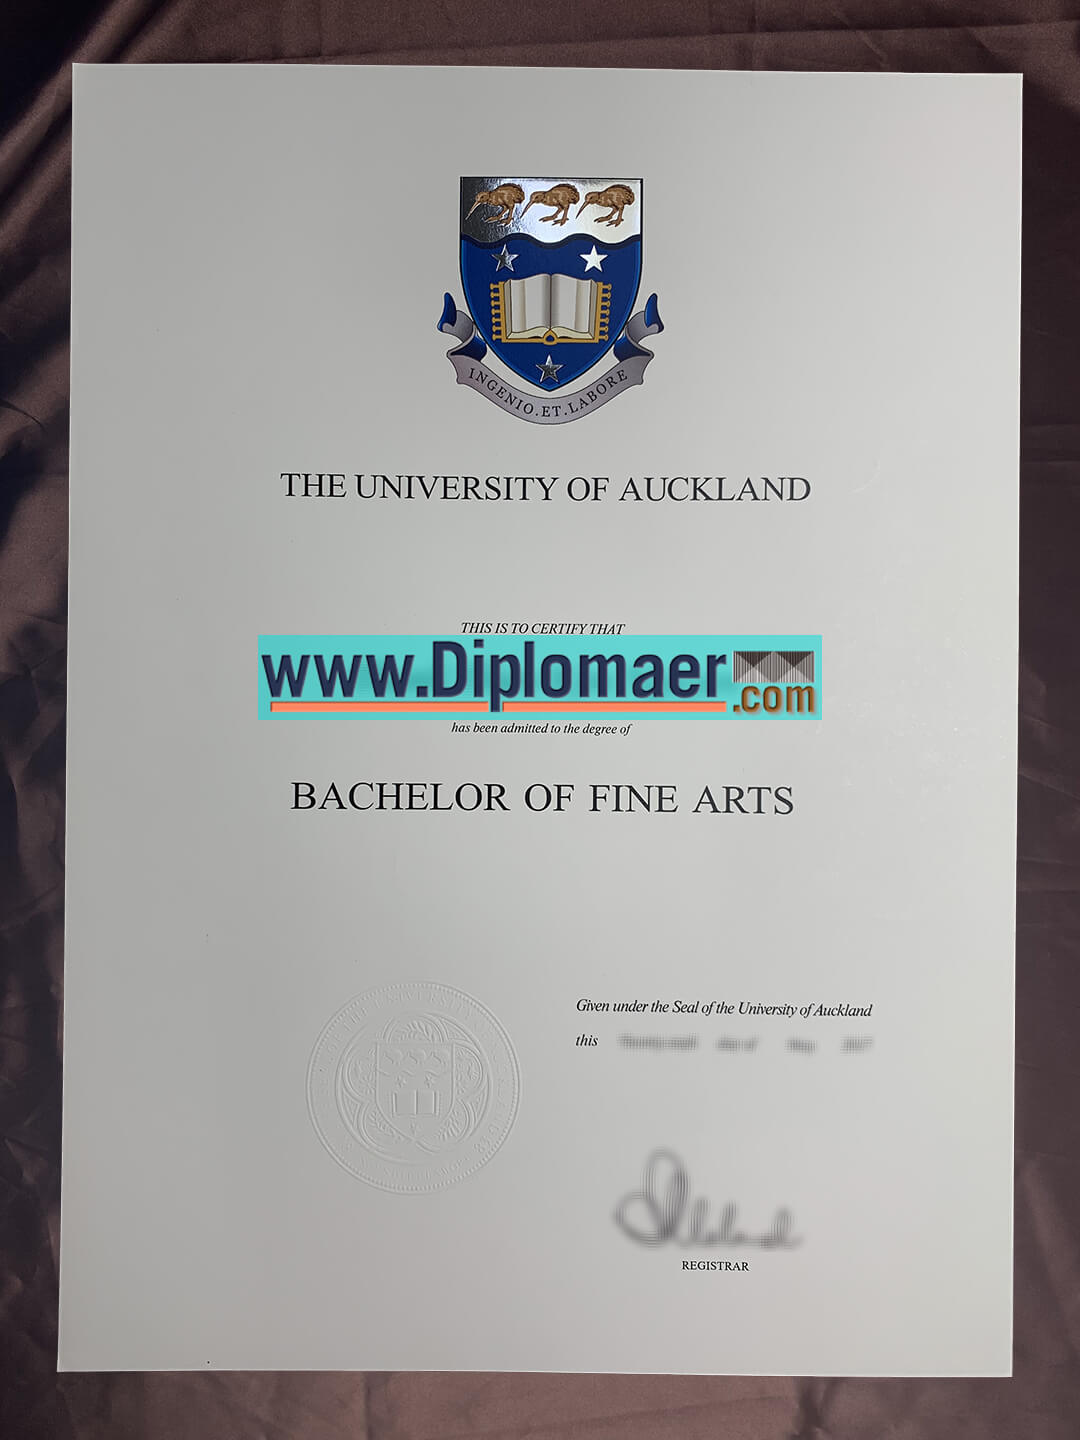 the University of Auckland Fake Diploma - How long does it take to buy University of Auckland fake diploma online？